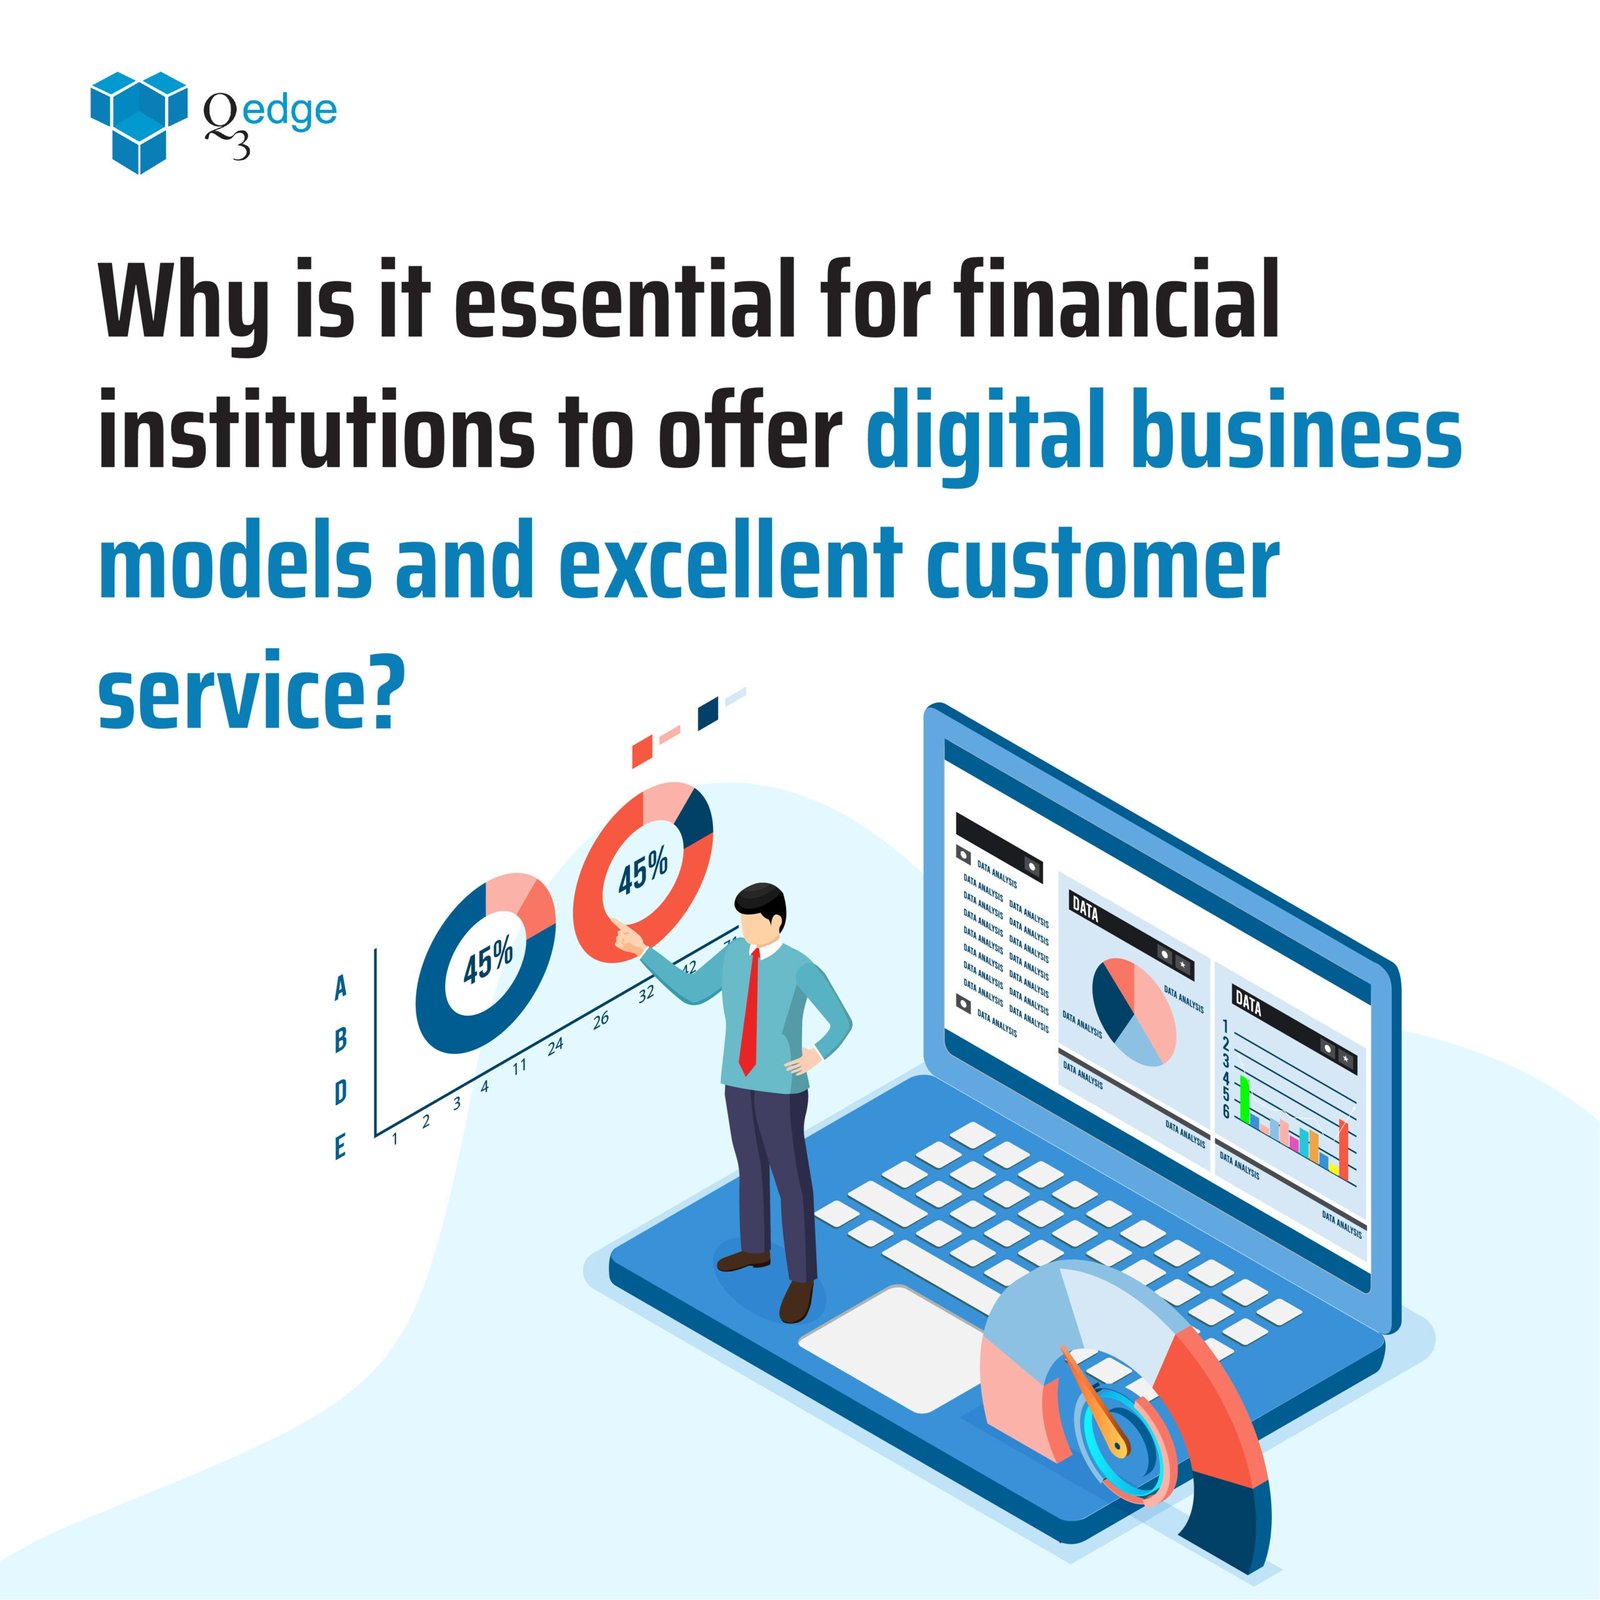 Why is it essential for financial institutions to offer digital business models and excellent customer service?